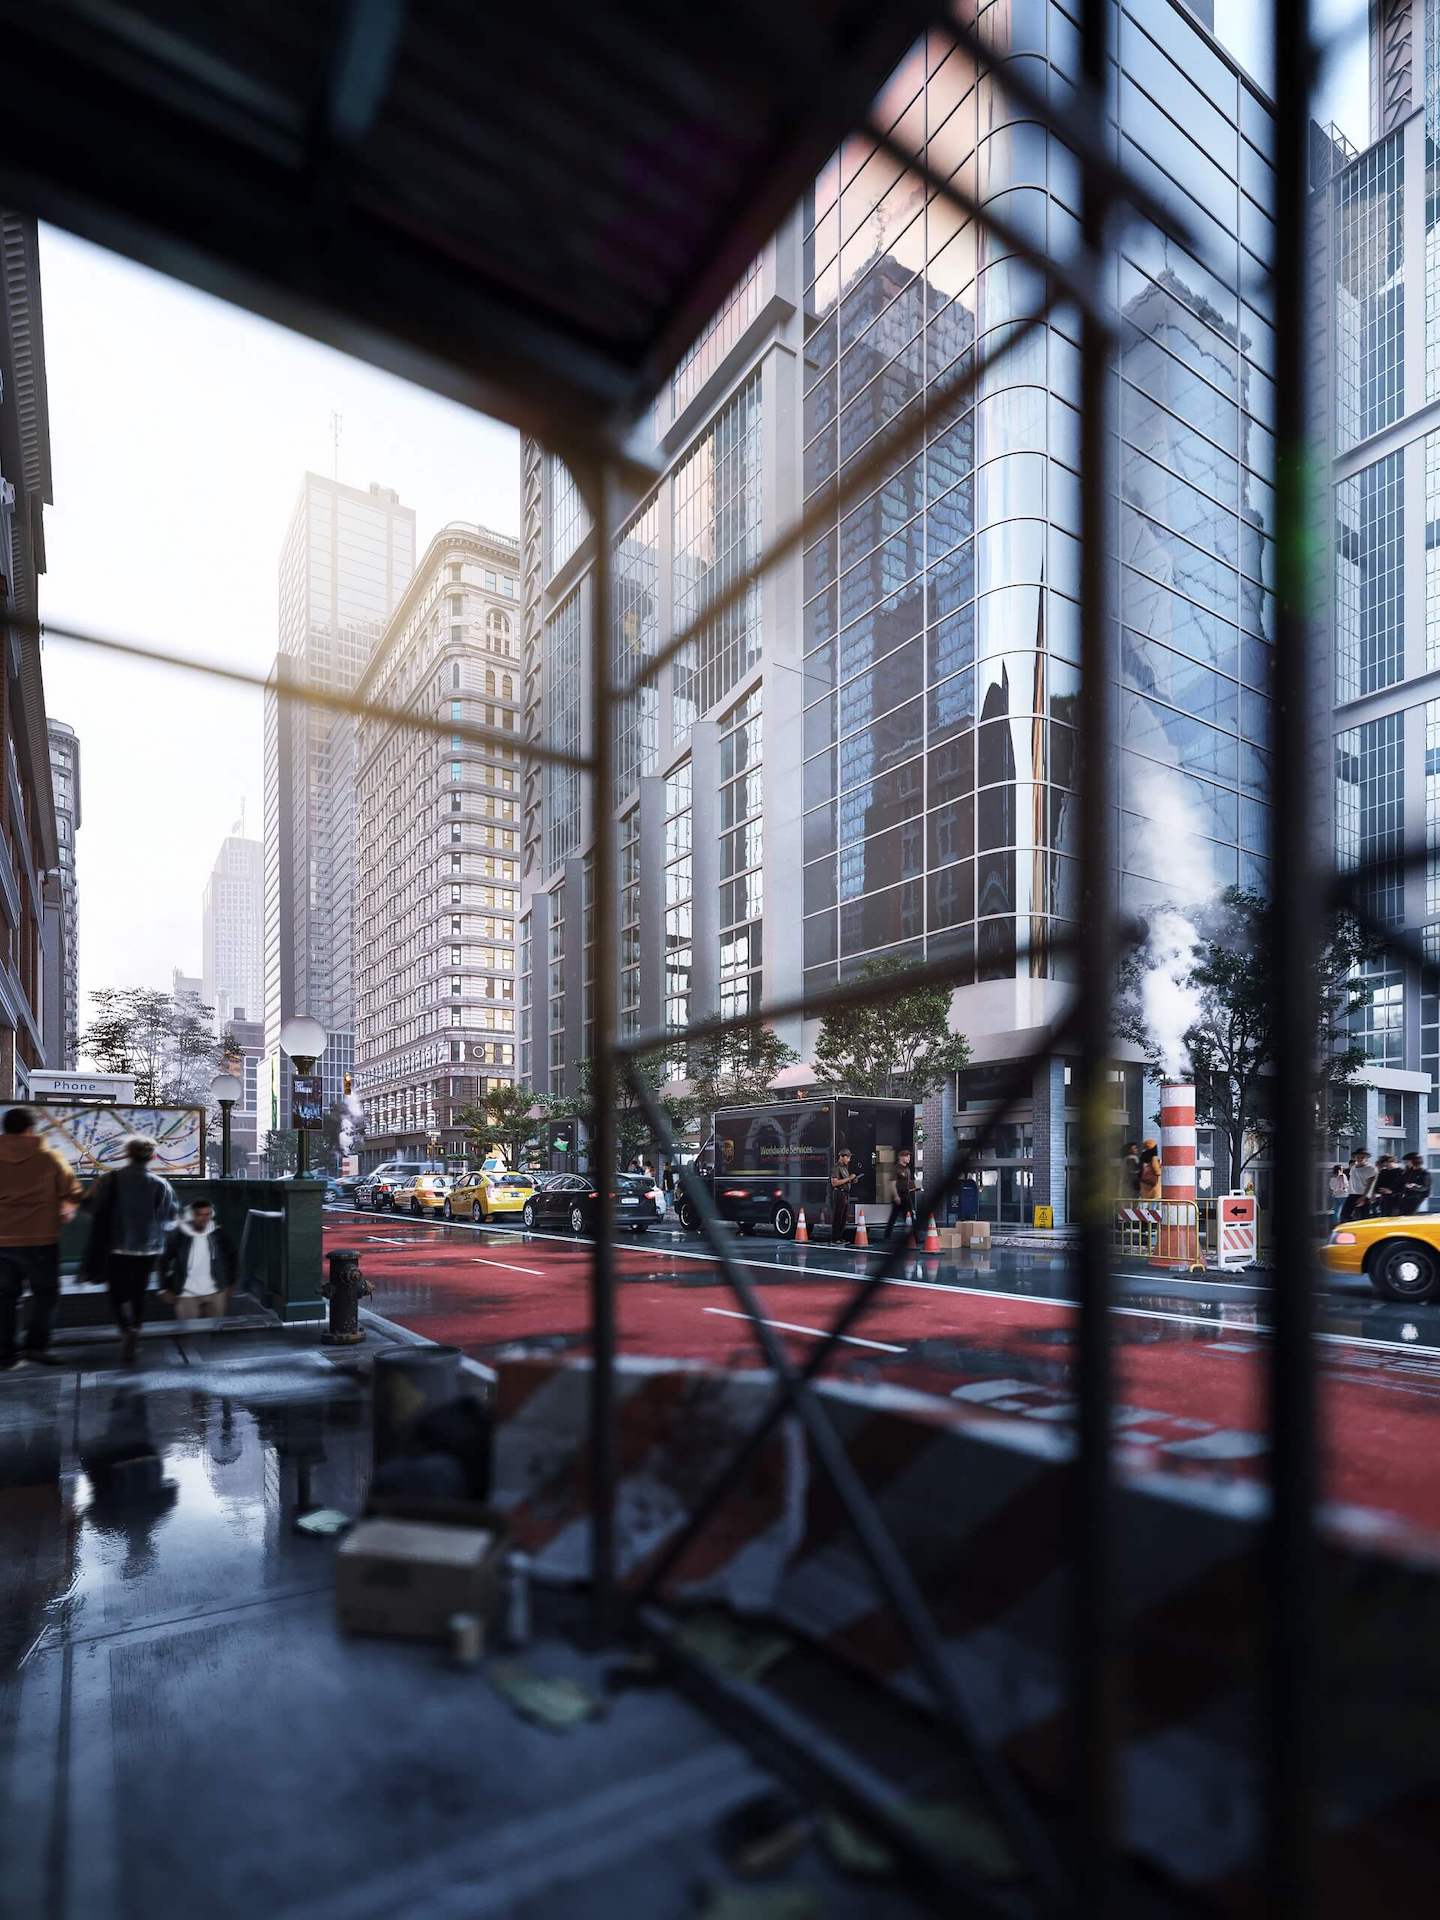 Cityscape 3D Rendering: Street View